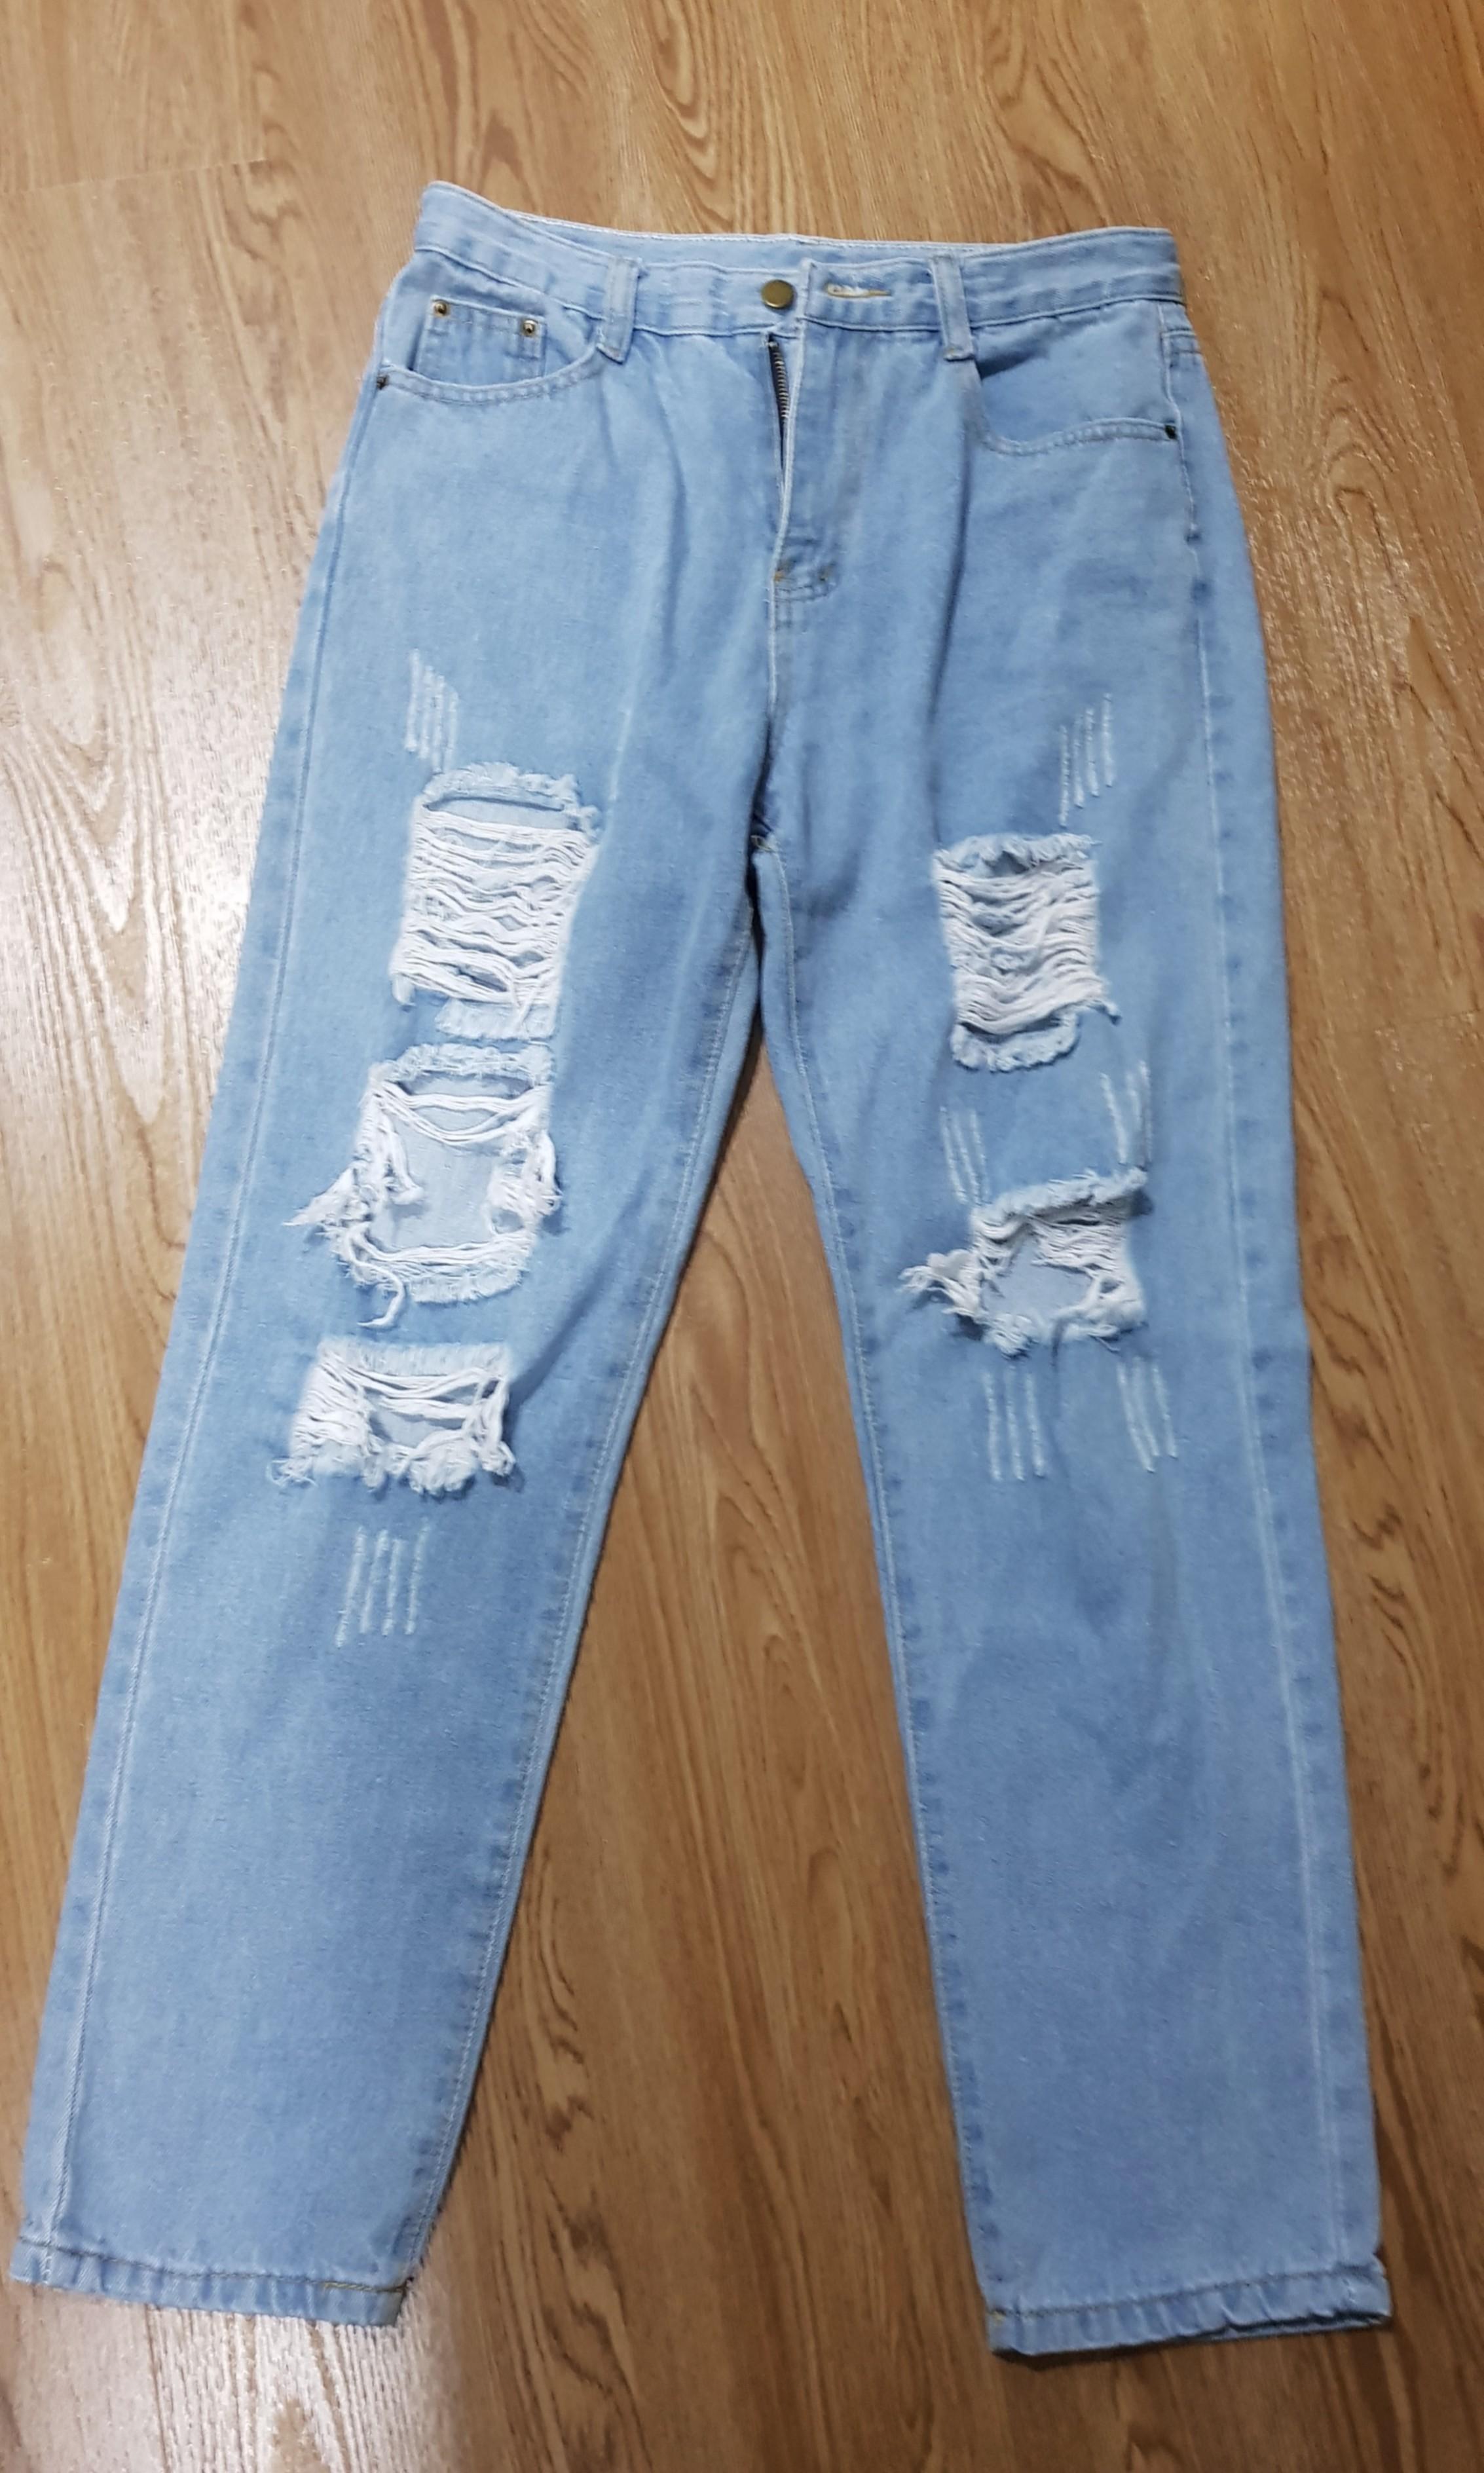 ripped jeans size 8